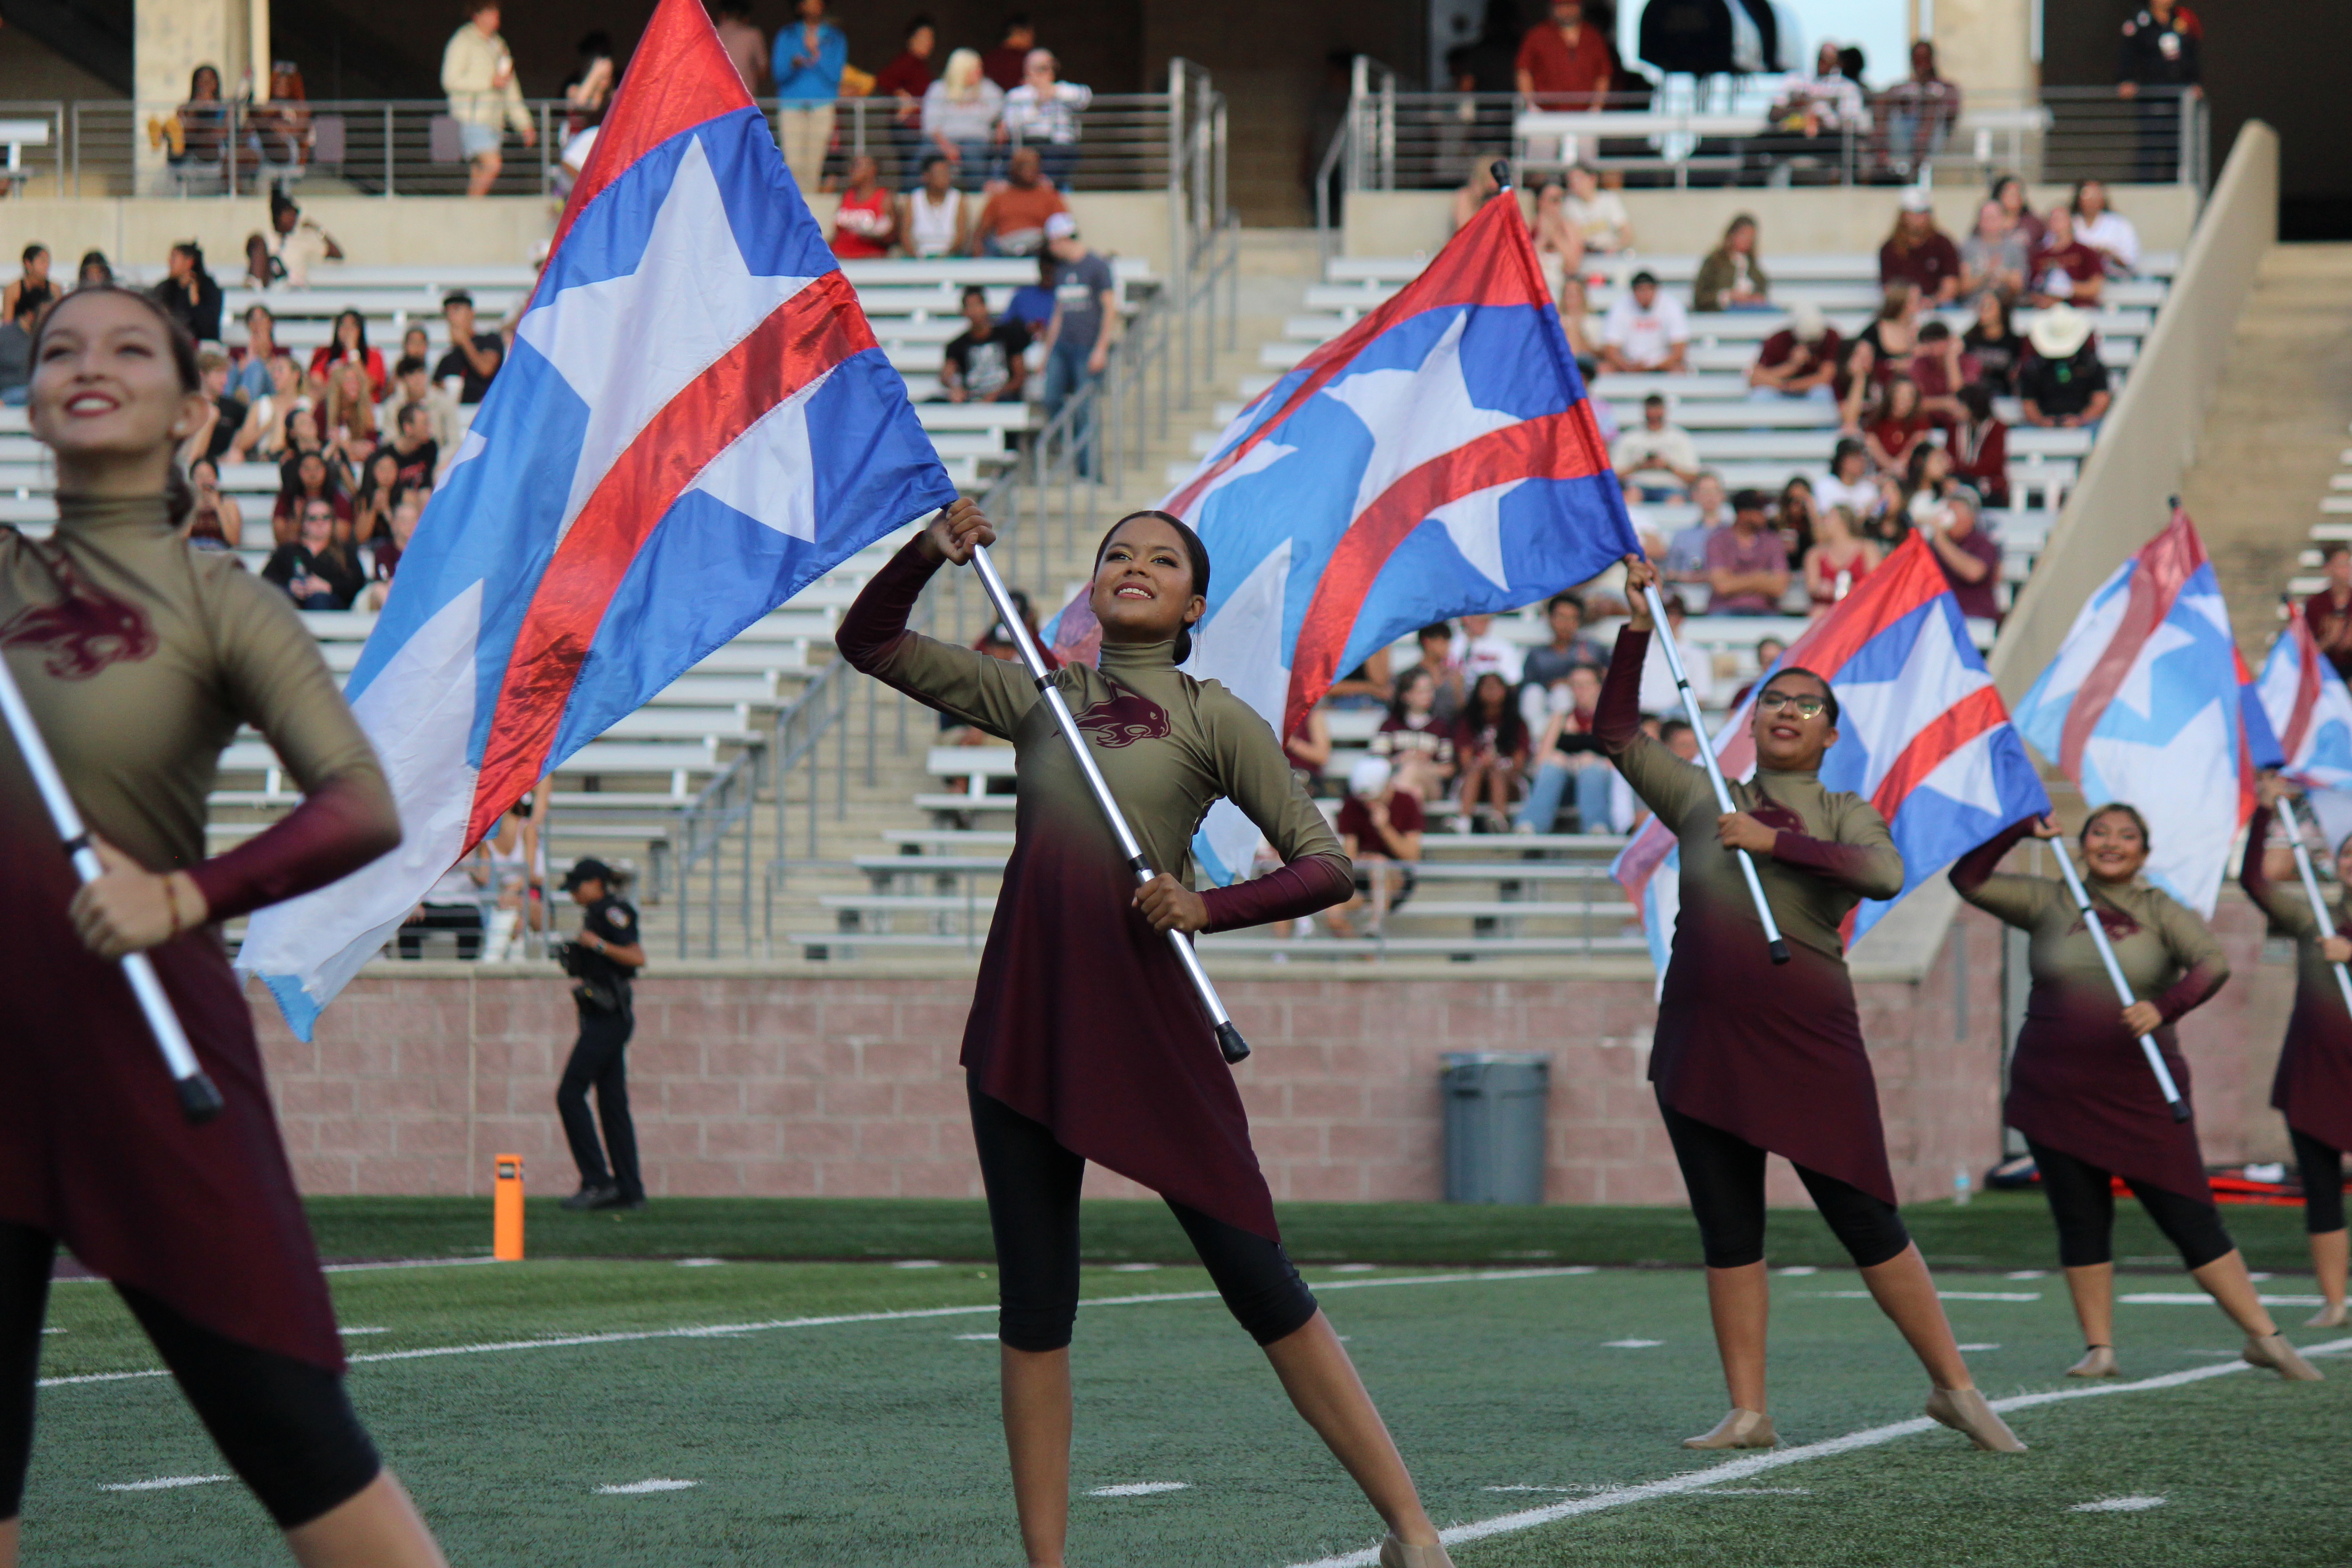 Color Guard members on field holding patriotic flags